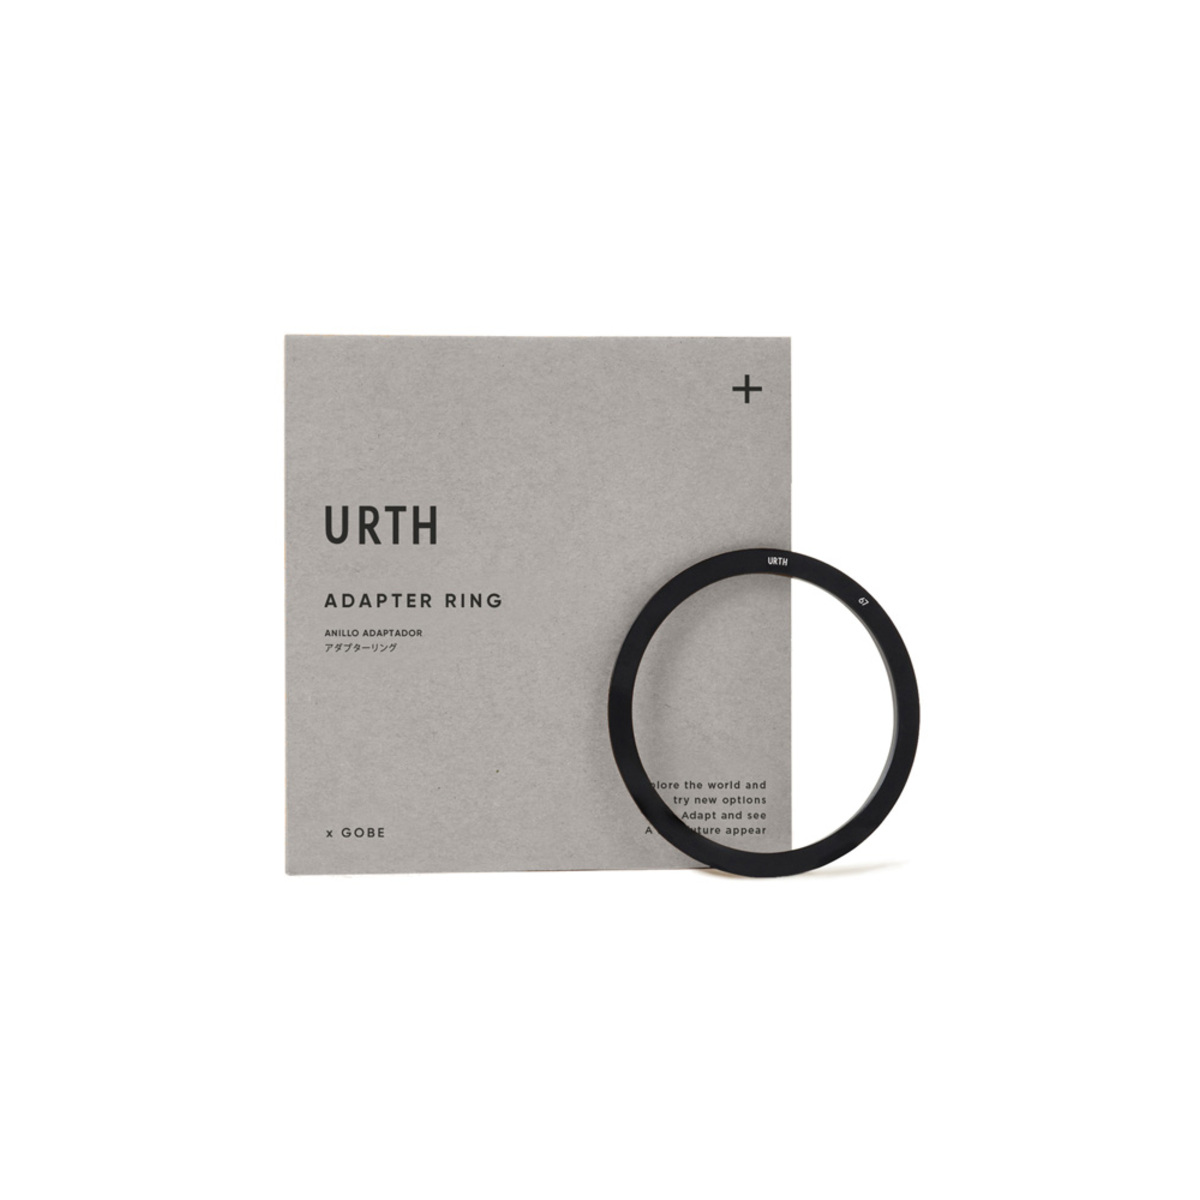 Urth 67mm Main Adapter for 75mm Square Filter Holder